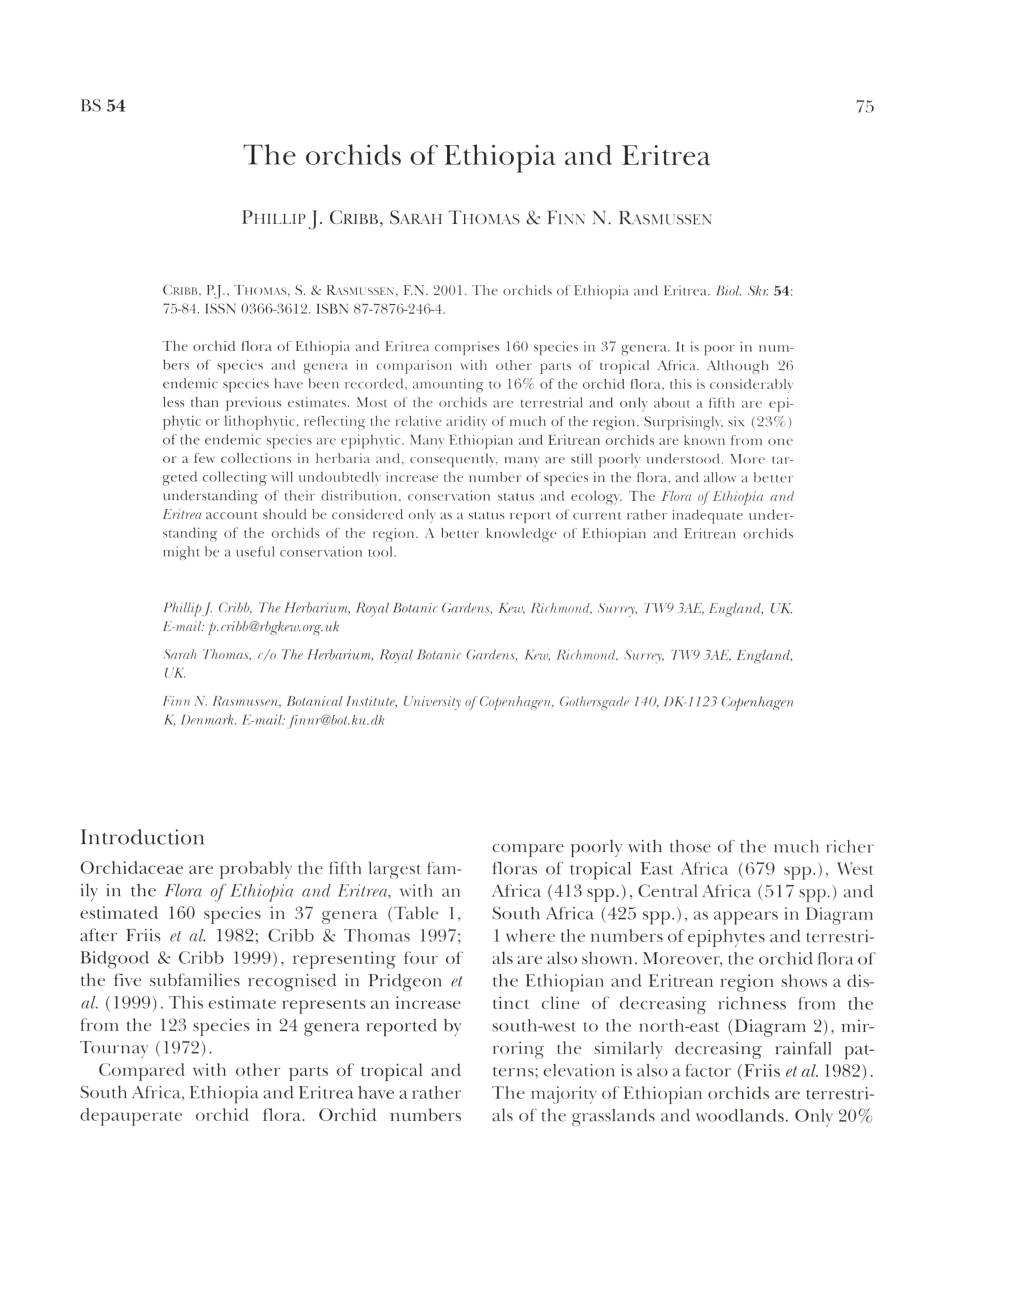 The Orchids of Ethiopia and Eritrea